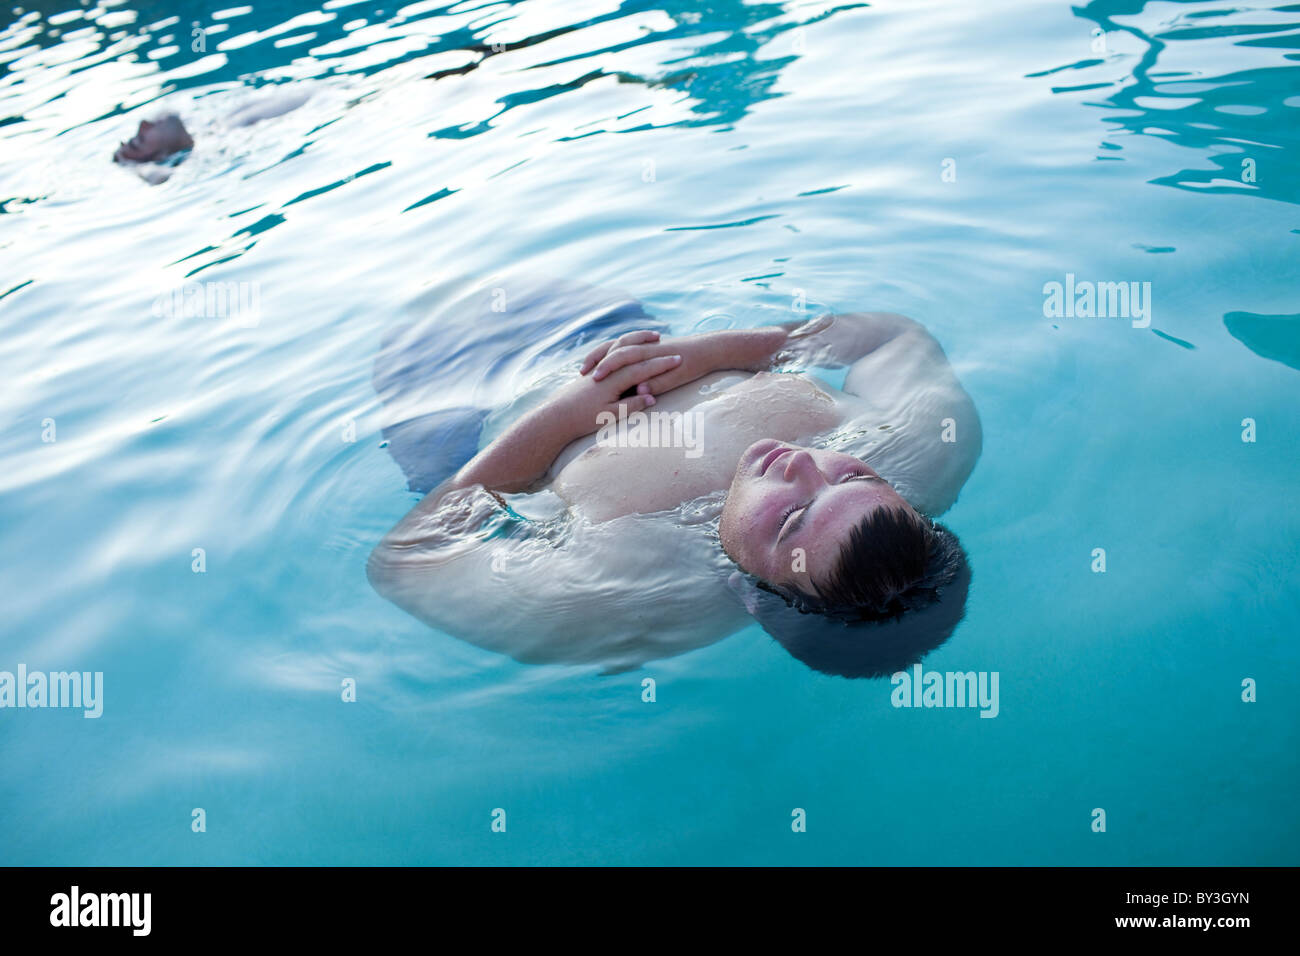 Hughson, California, United States.  An obese teenager floats in the swimming pool. Stock Photo